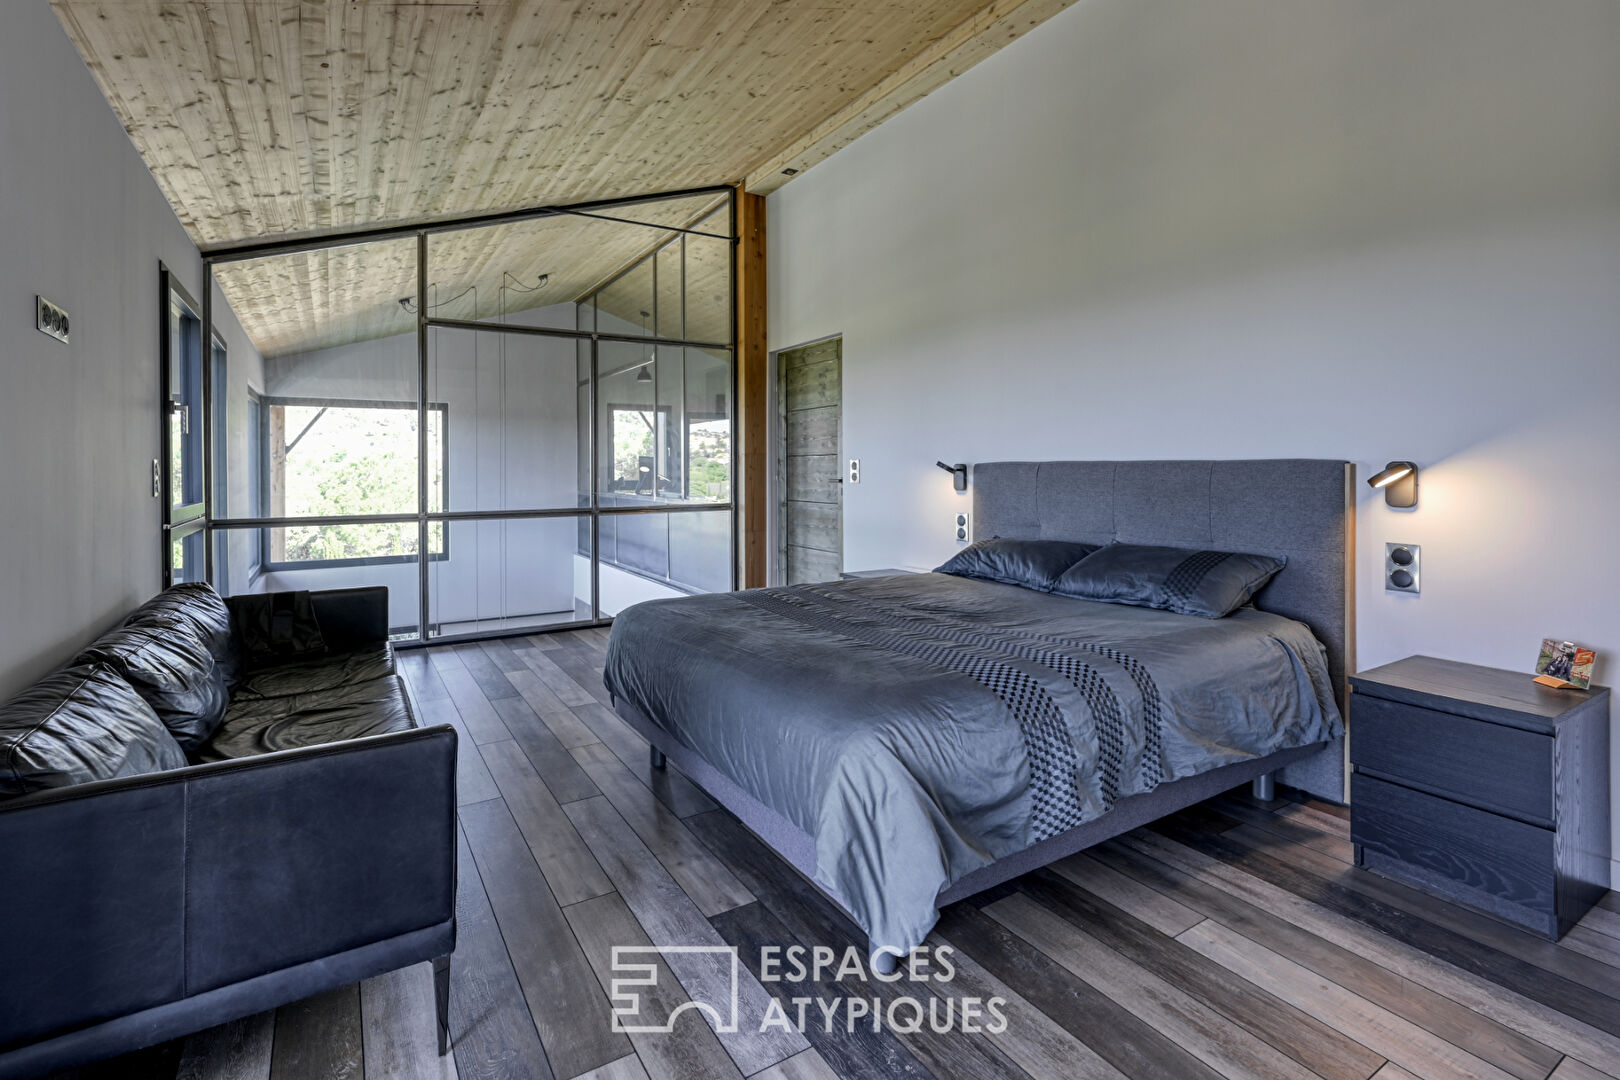 High-end passive house with panoramic views of the Luberon